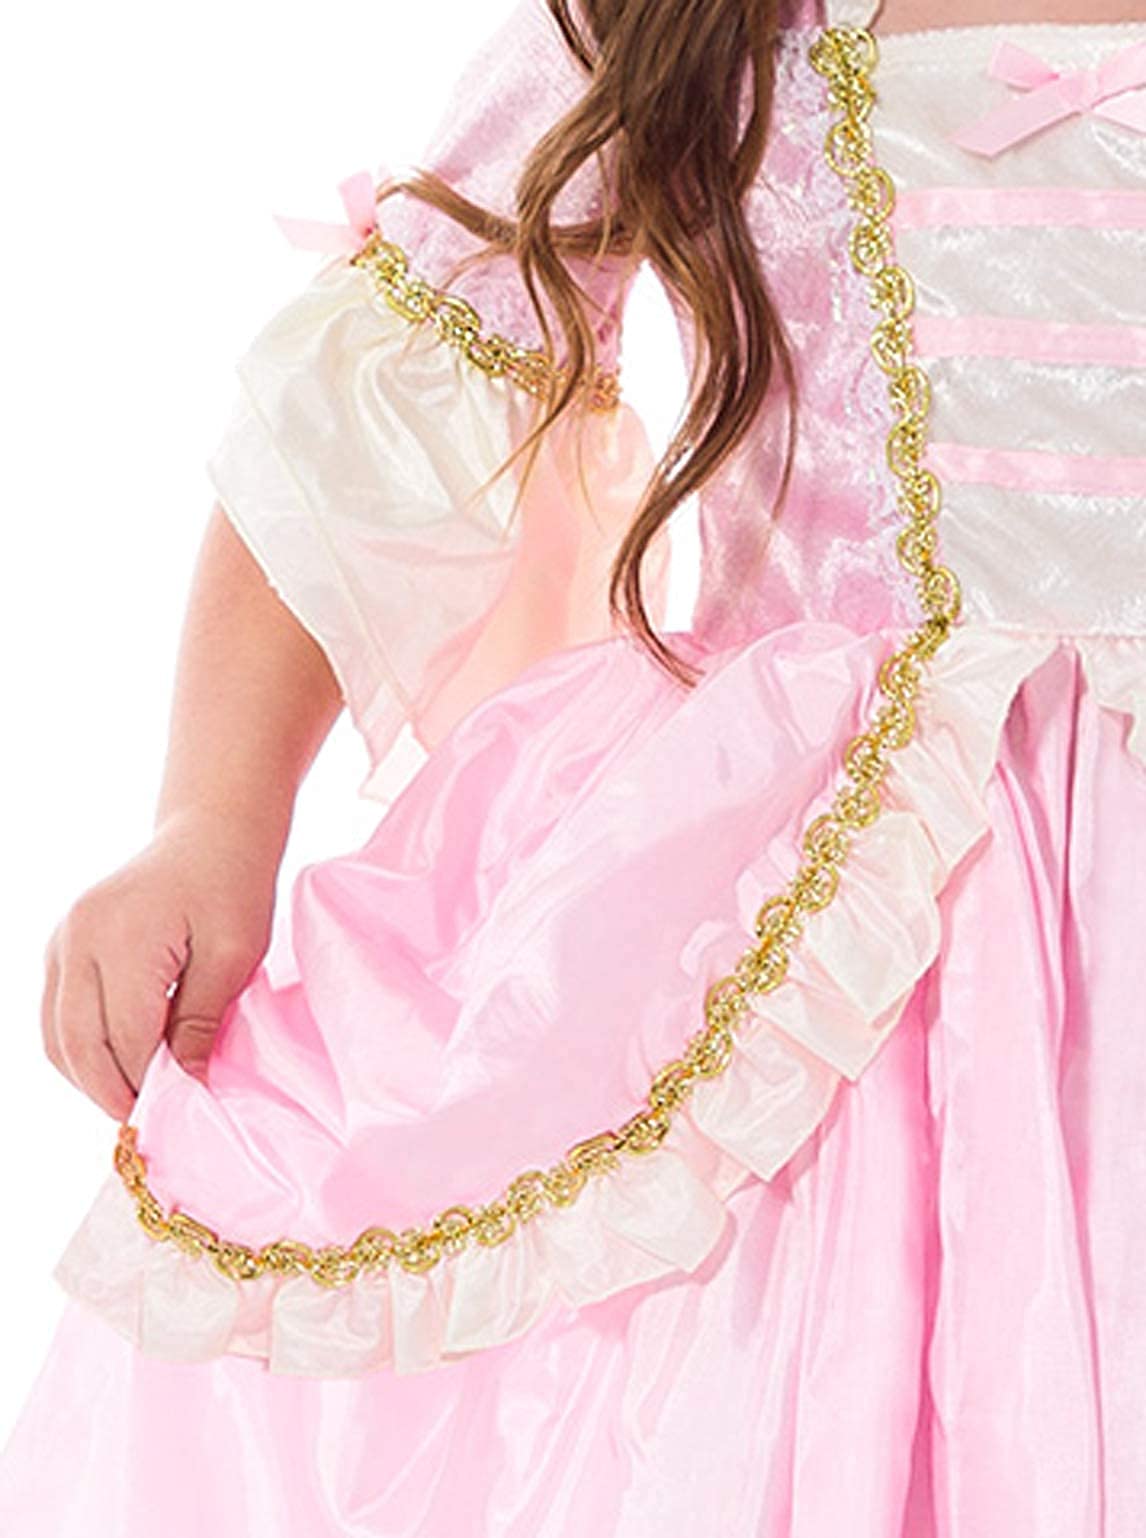 Little Adventures Pink Renaissance Princess Dress Up Costume (Medium Age 3-5) with Matching Doll Dres - Machine Washable Child Pretend Play and Party Dress with No Glitter